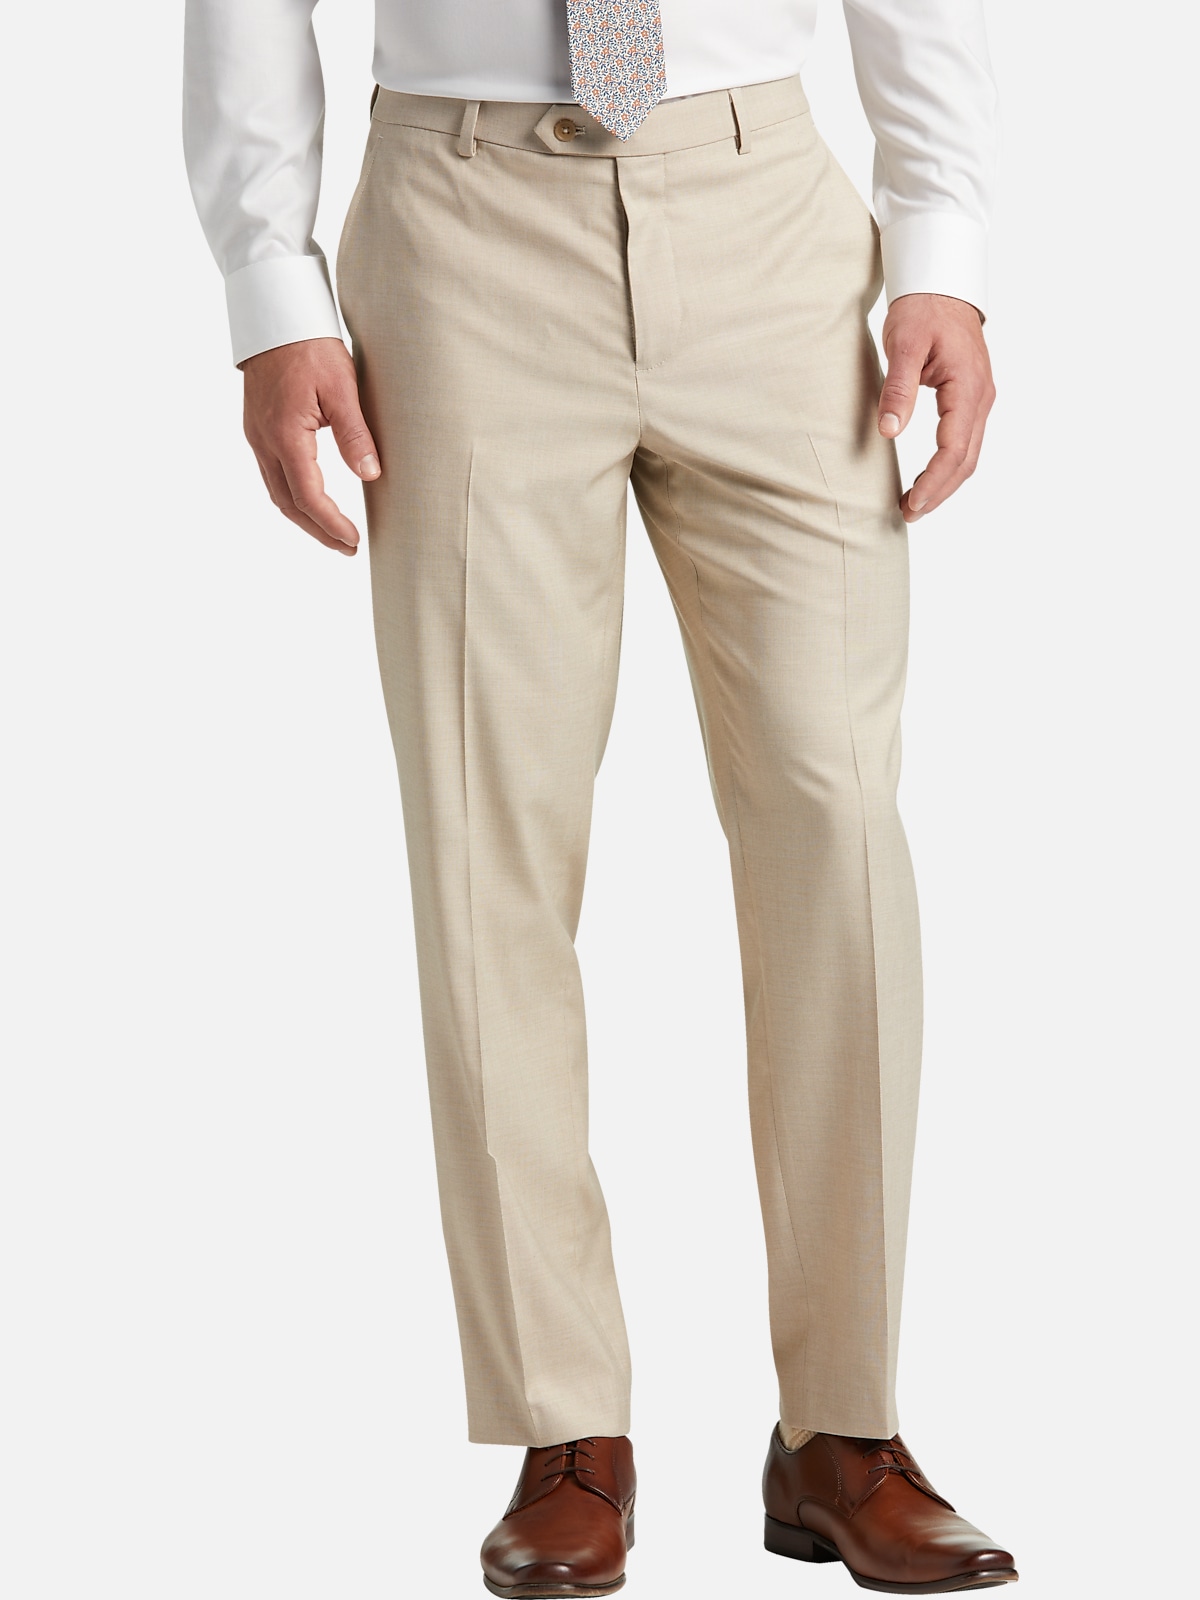 Pronto Uomo Modern Fit Suit Separates Dress Pants | All Clearance $39. ...